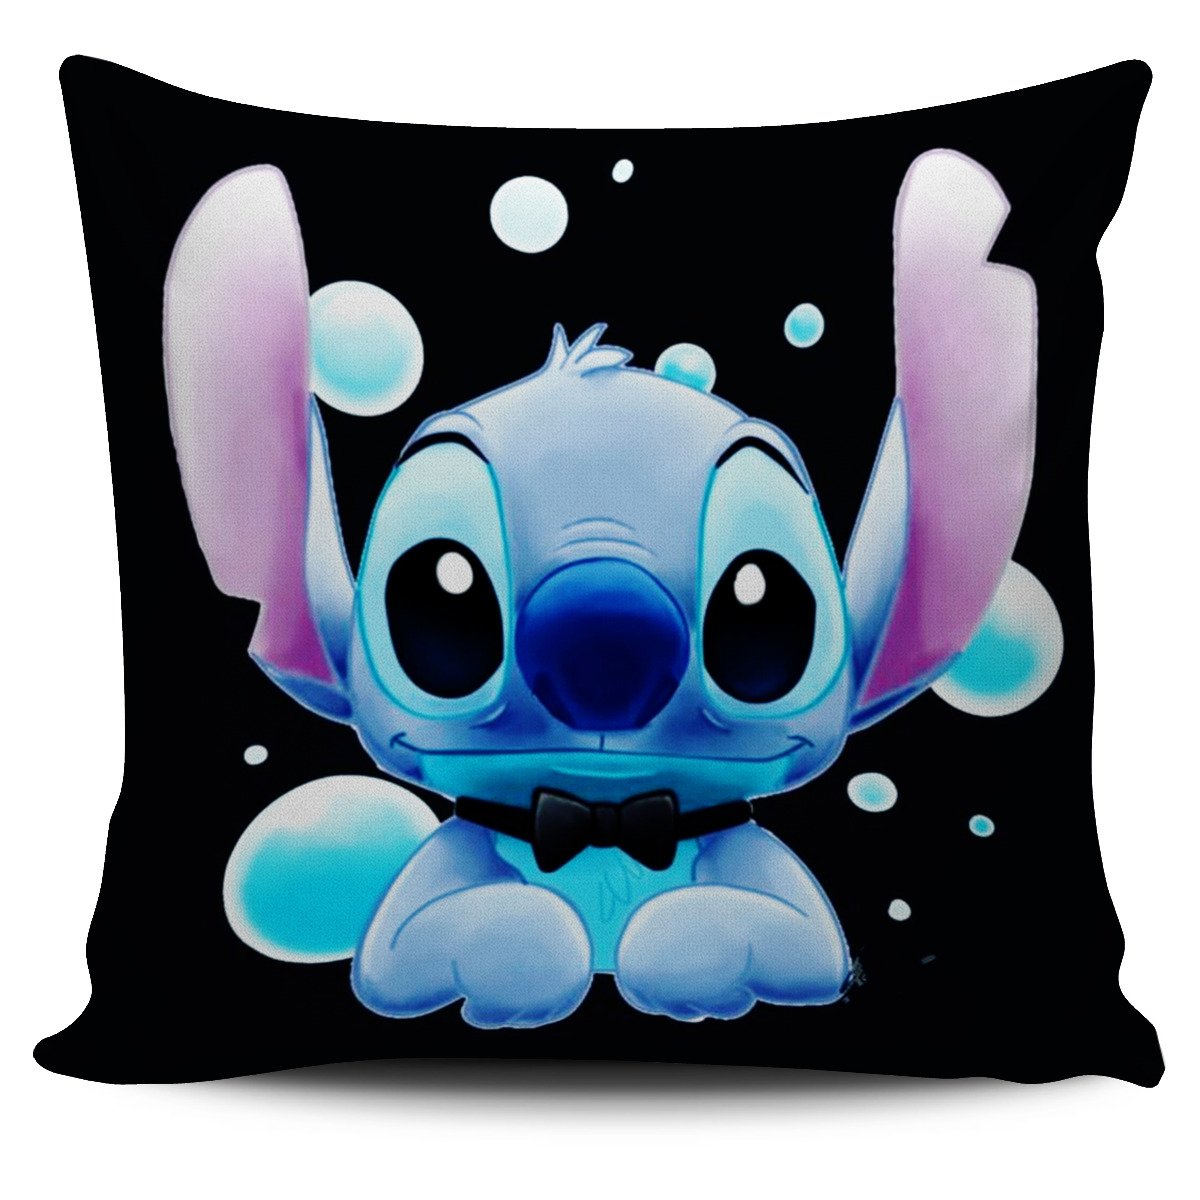 Stitch Pillow Covers